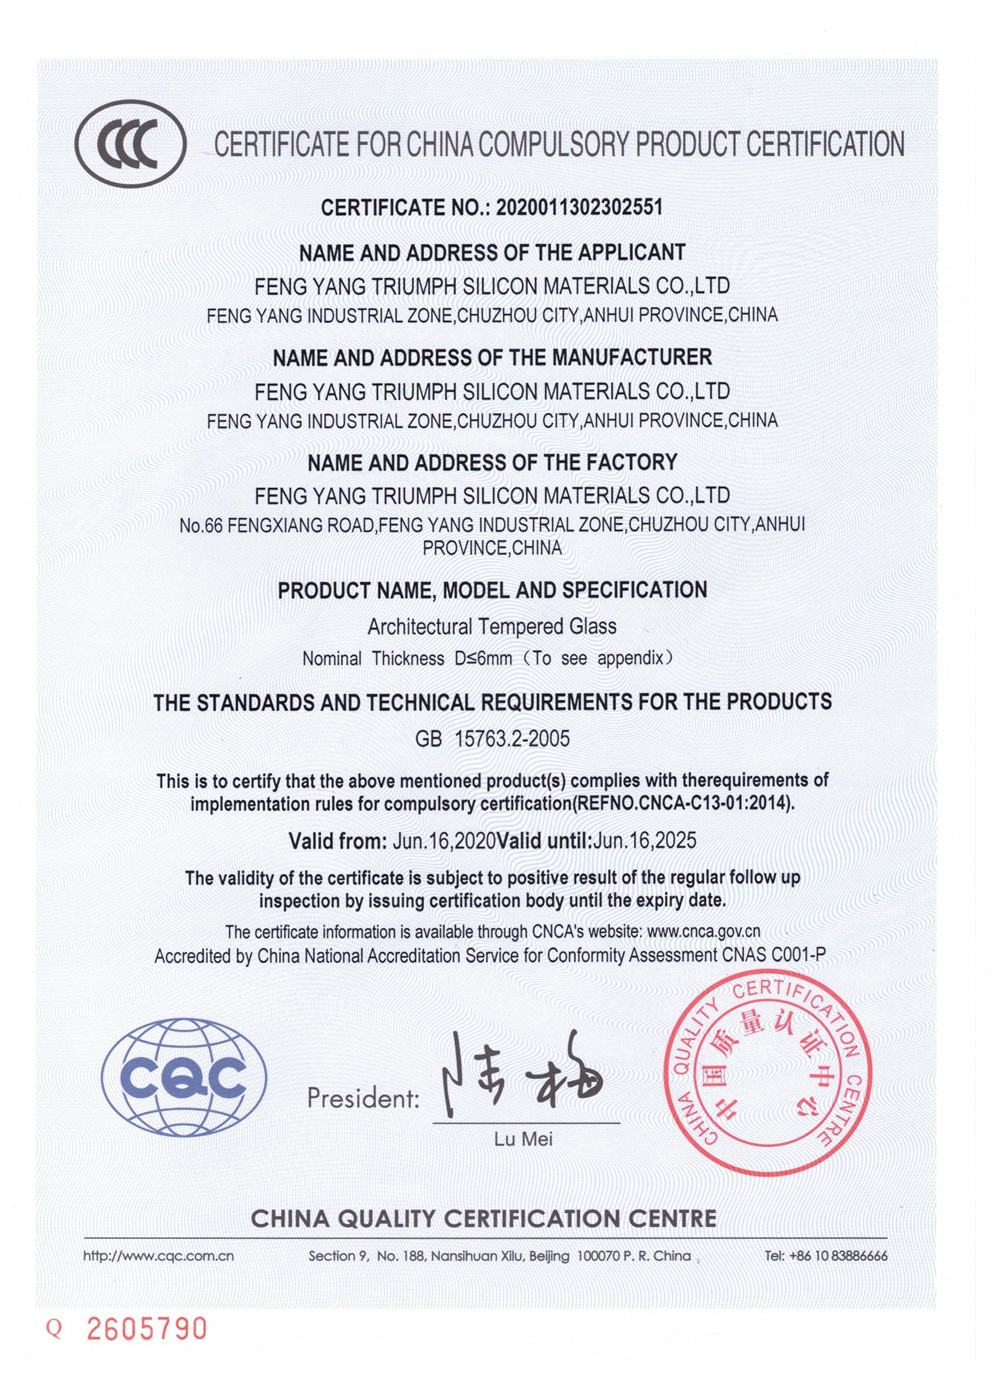 Certificate For China Compulsory Product Certification-1